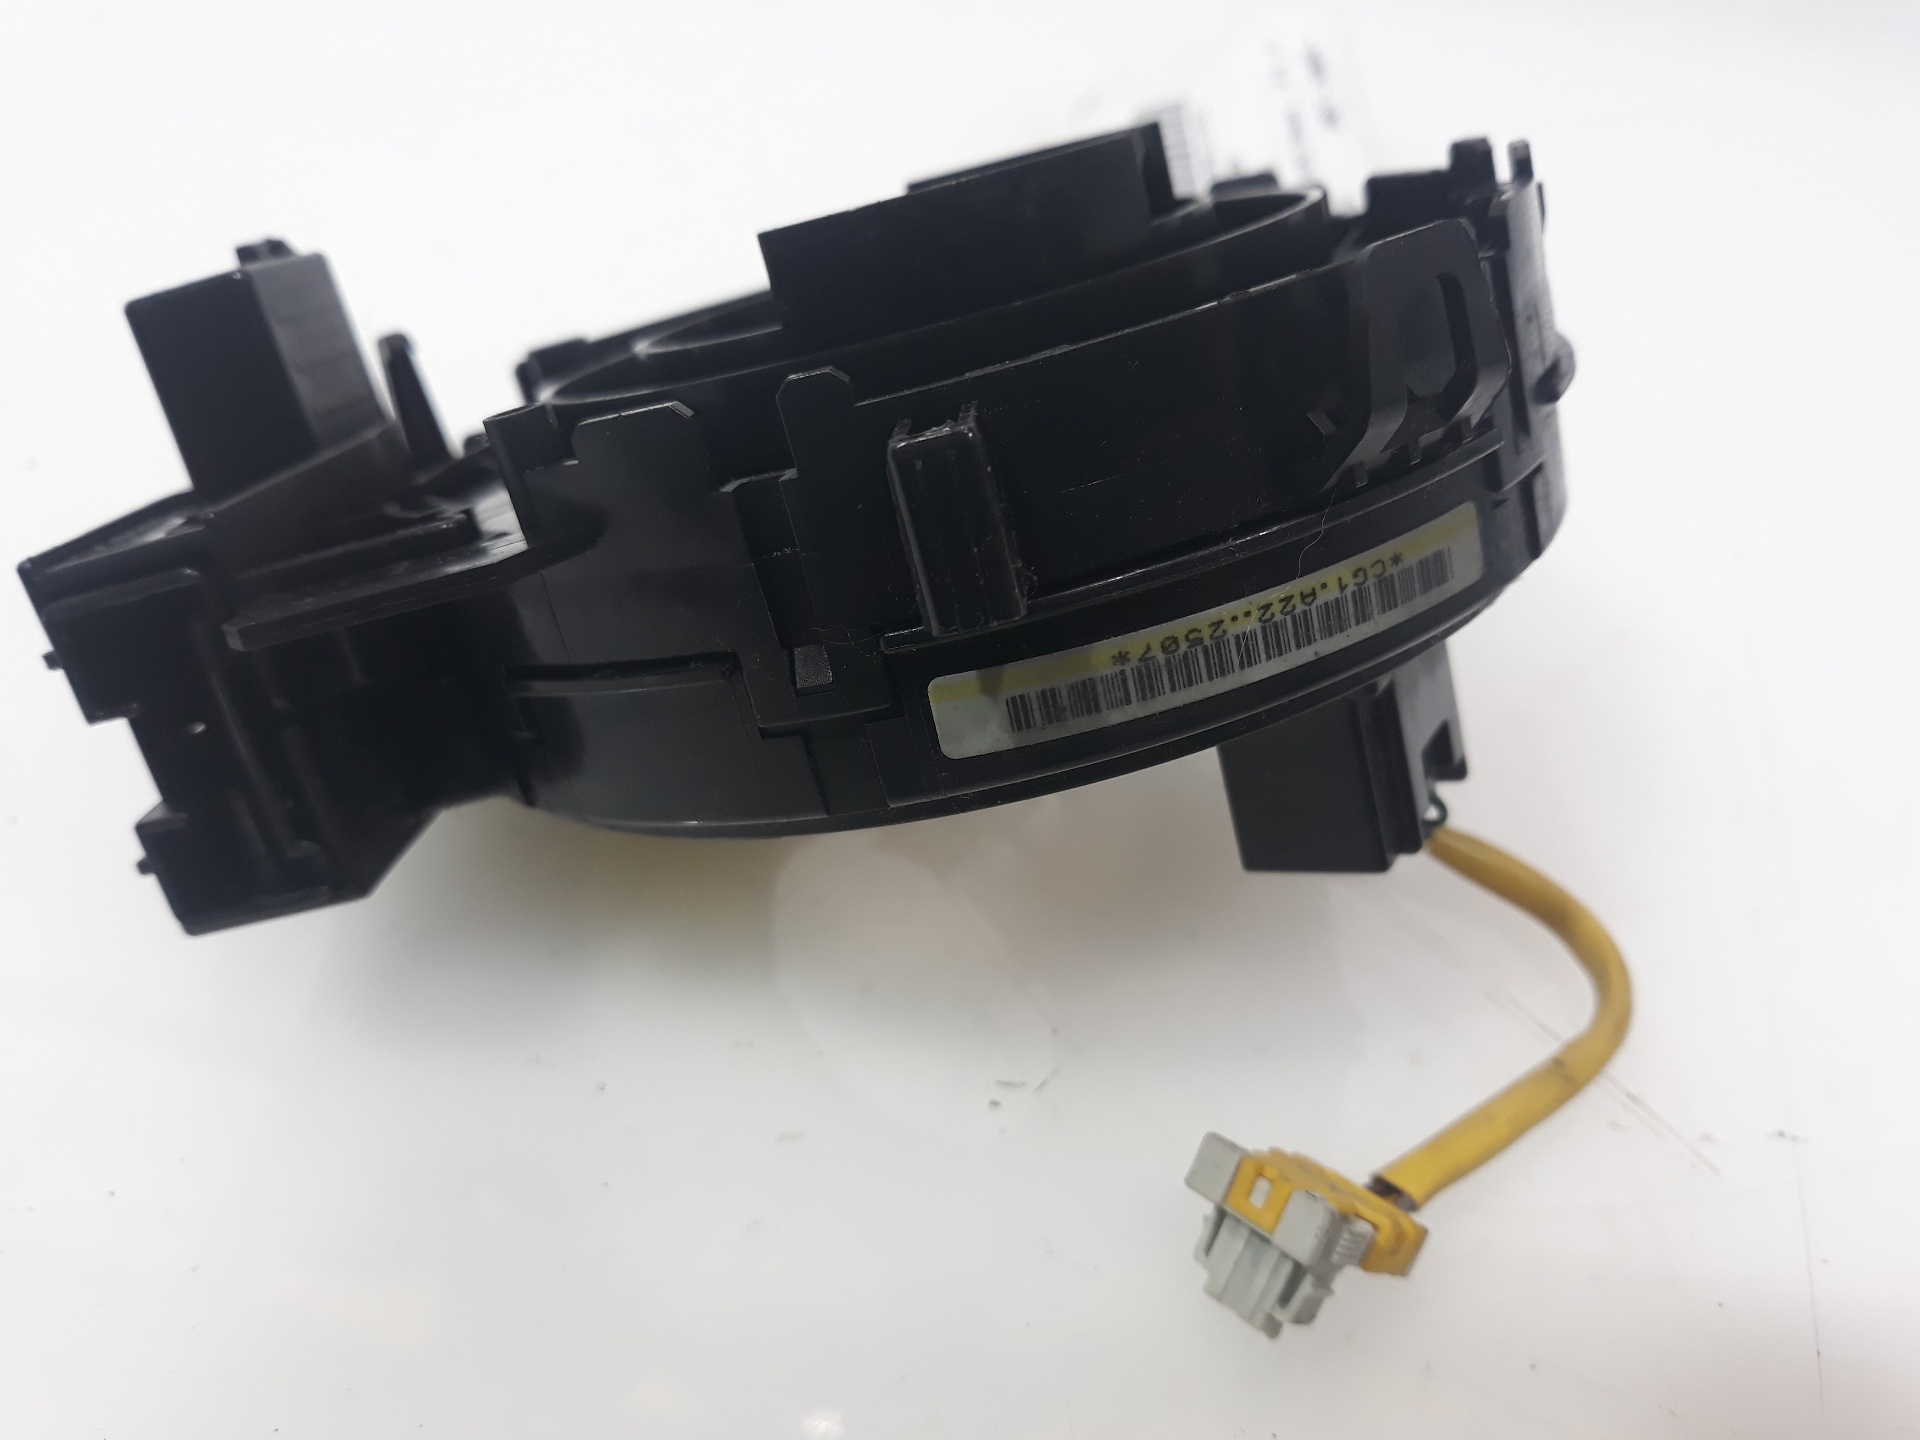 FORD Fiesta 5 generation (2001-2010) Steering Wheel Slip Ring Squib 8A6T-14A664-AD, 8A6T-14A664-AD 19167742